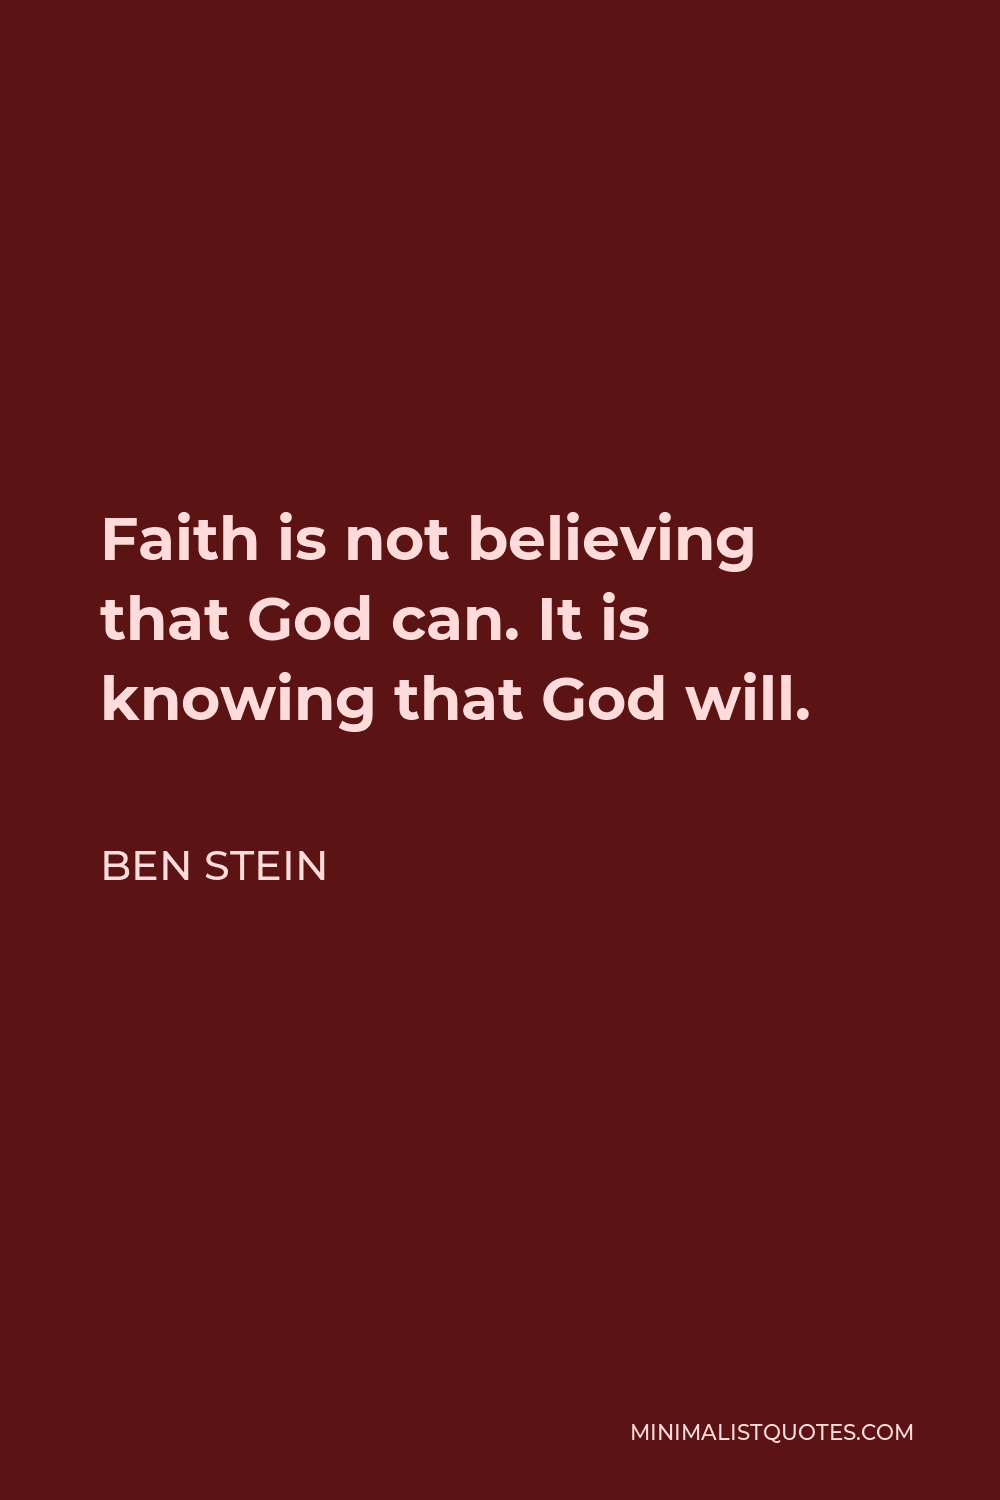 Ben Stein Quote - Faith is not believing that God can. It is knowing that God will.